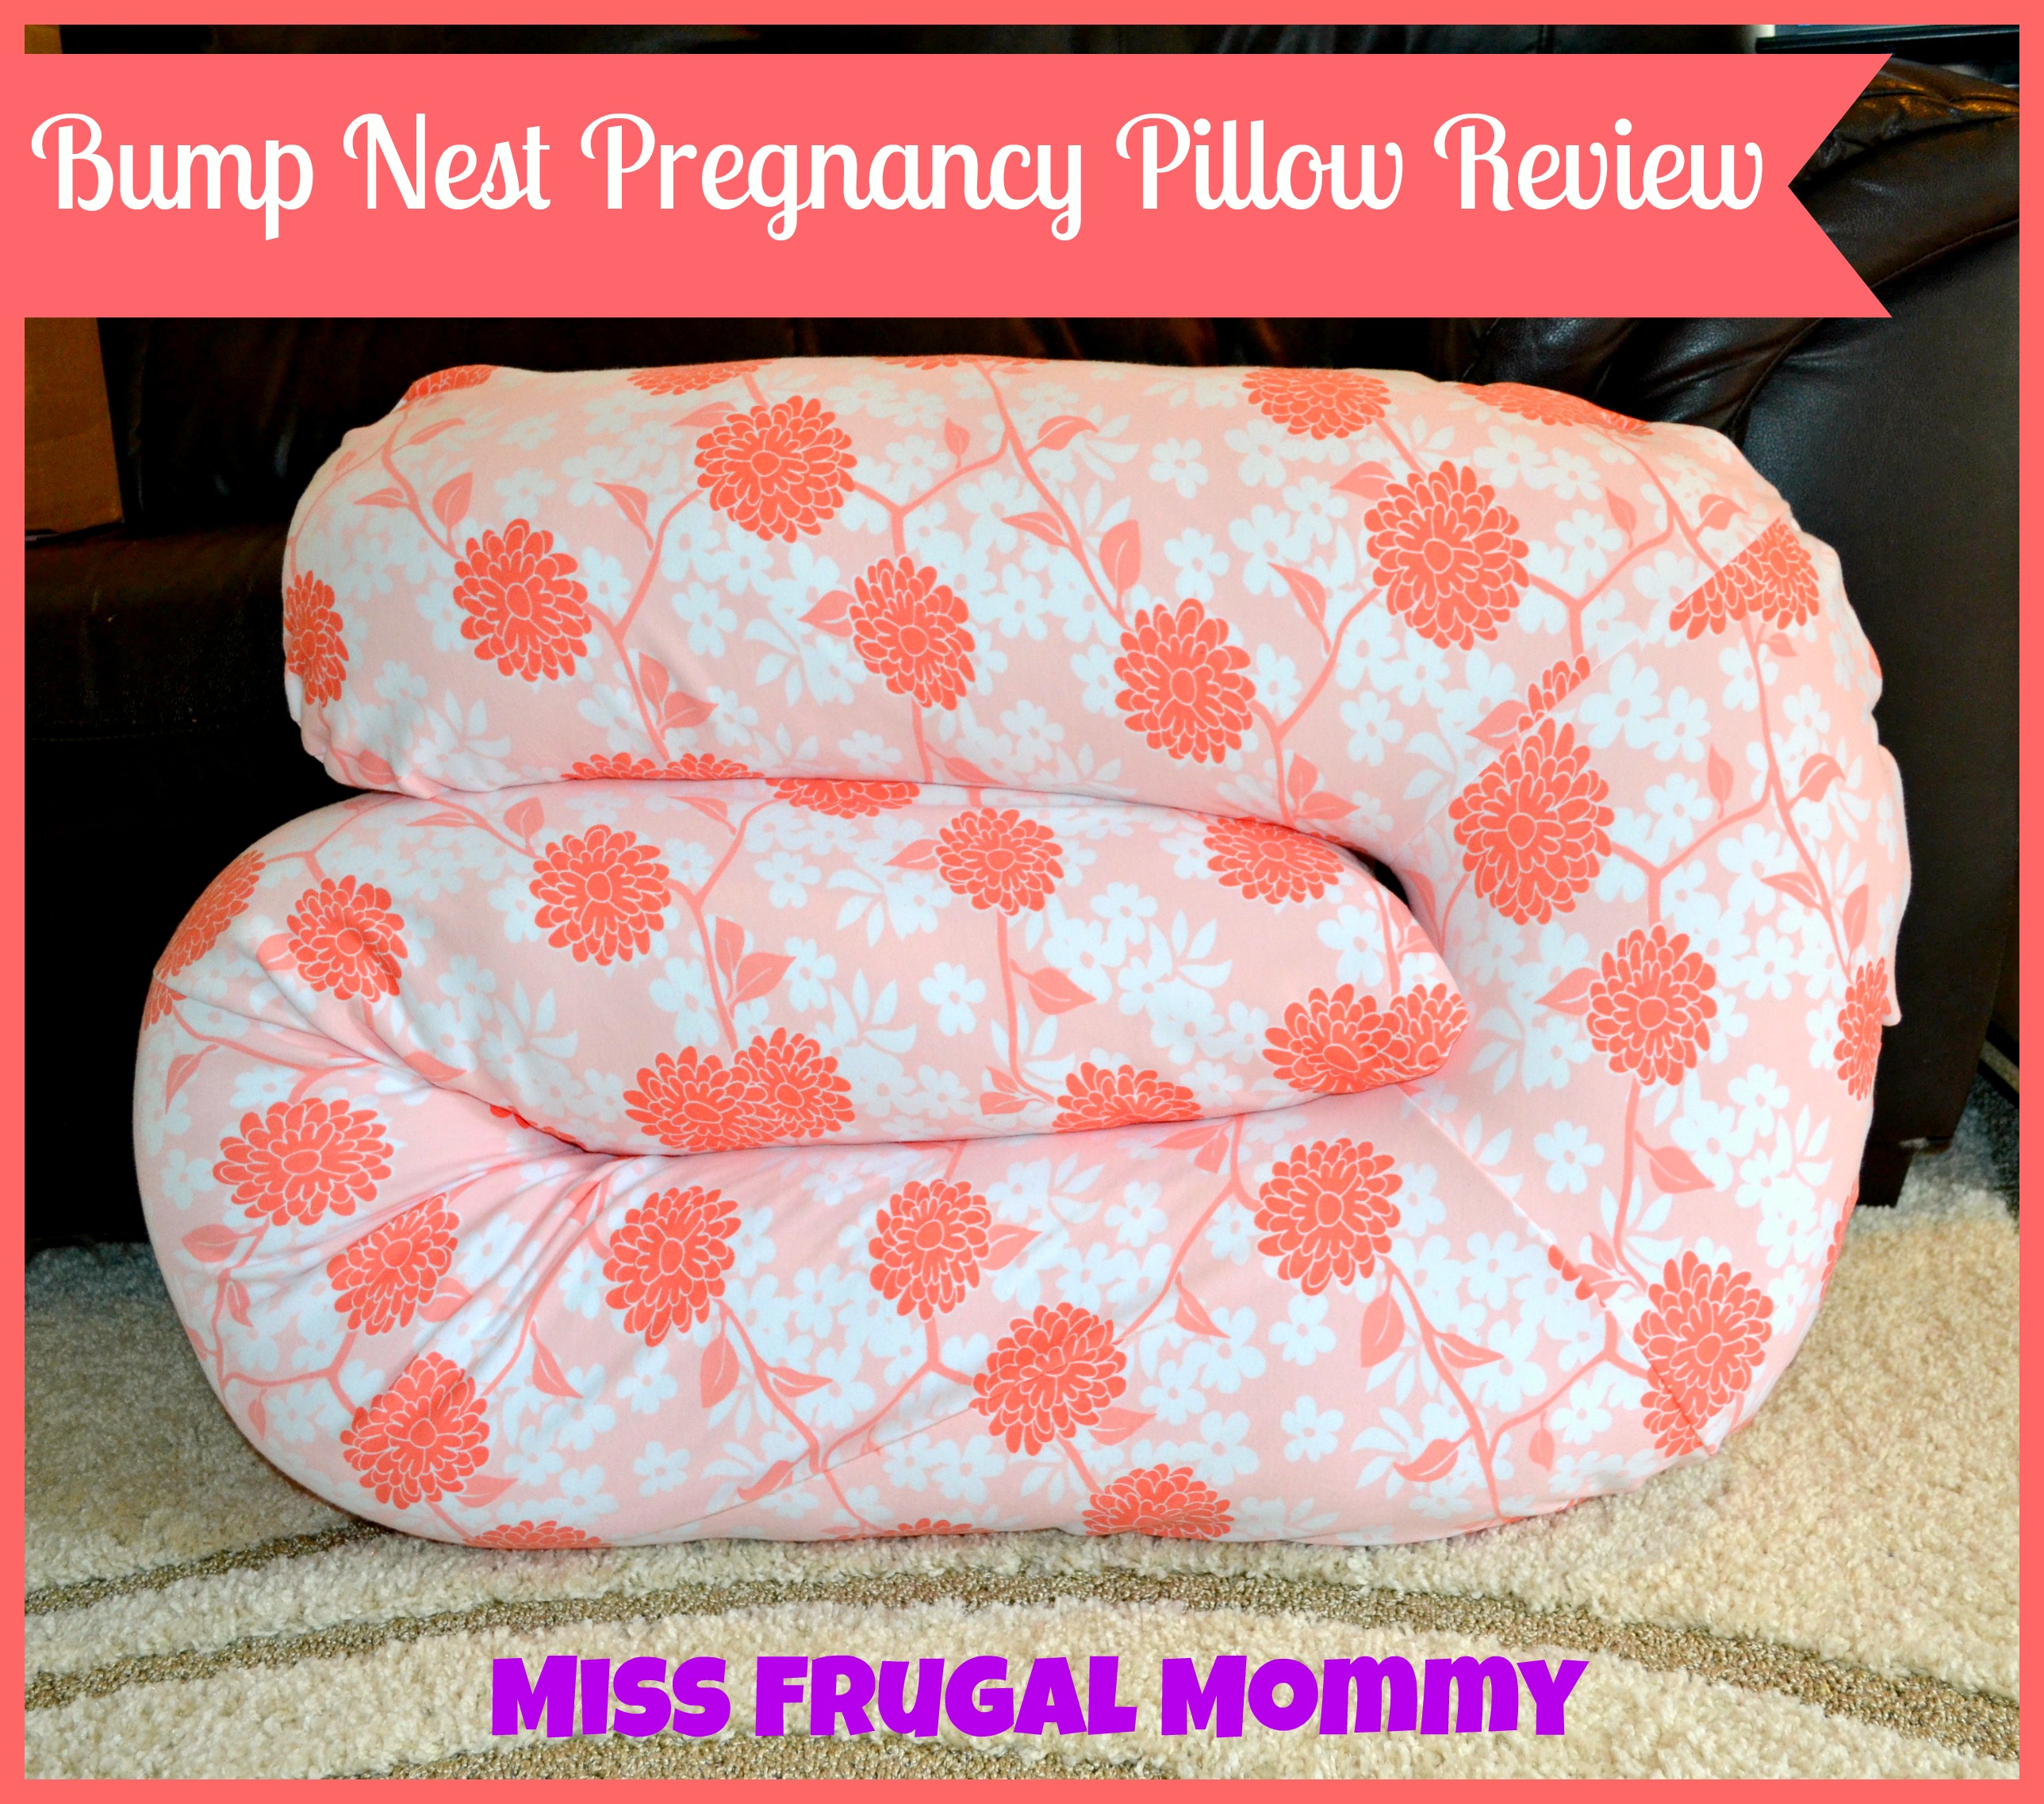 Bump Nest Pregnancy Pillow Review (Getting Ready For Baby Gift Guide)